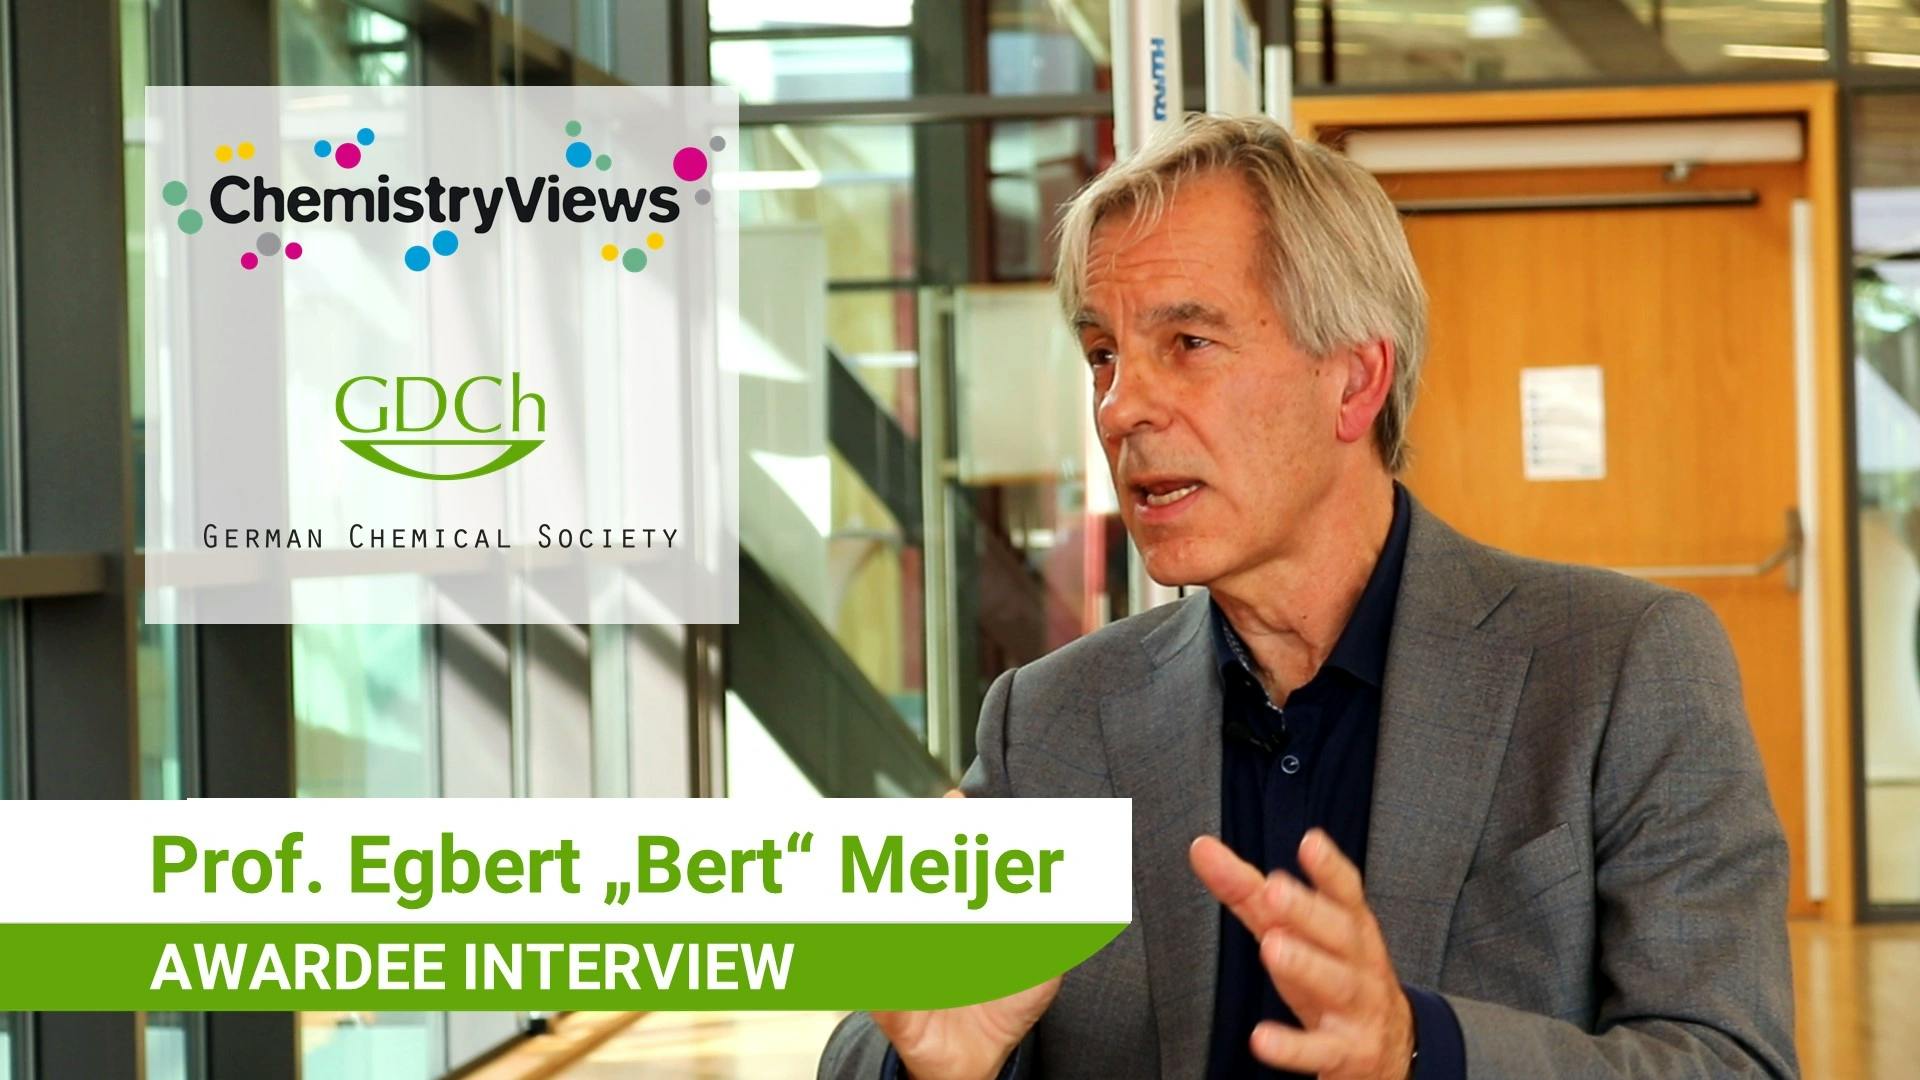 “We have to do that together.”—Awardee interview with Bert Meijer